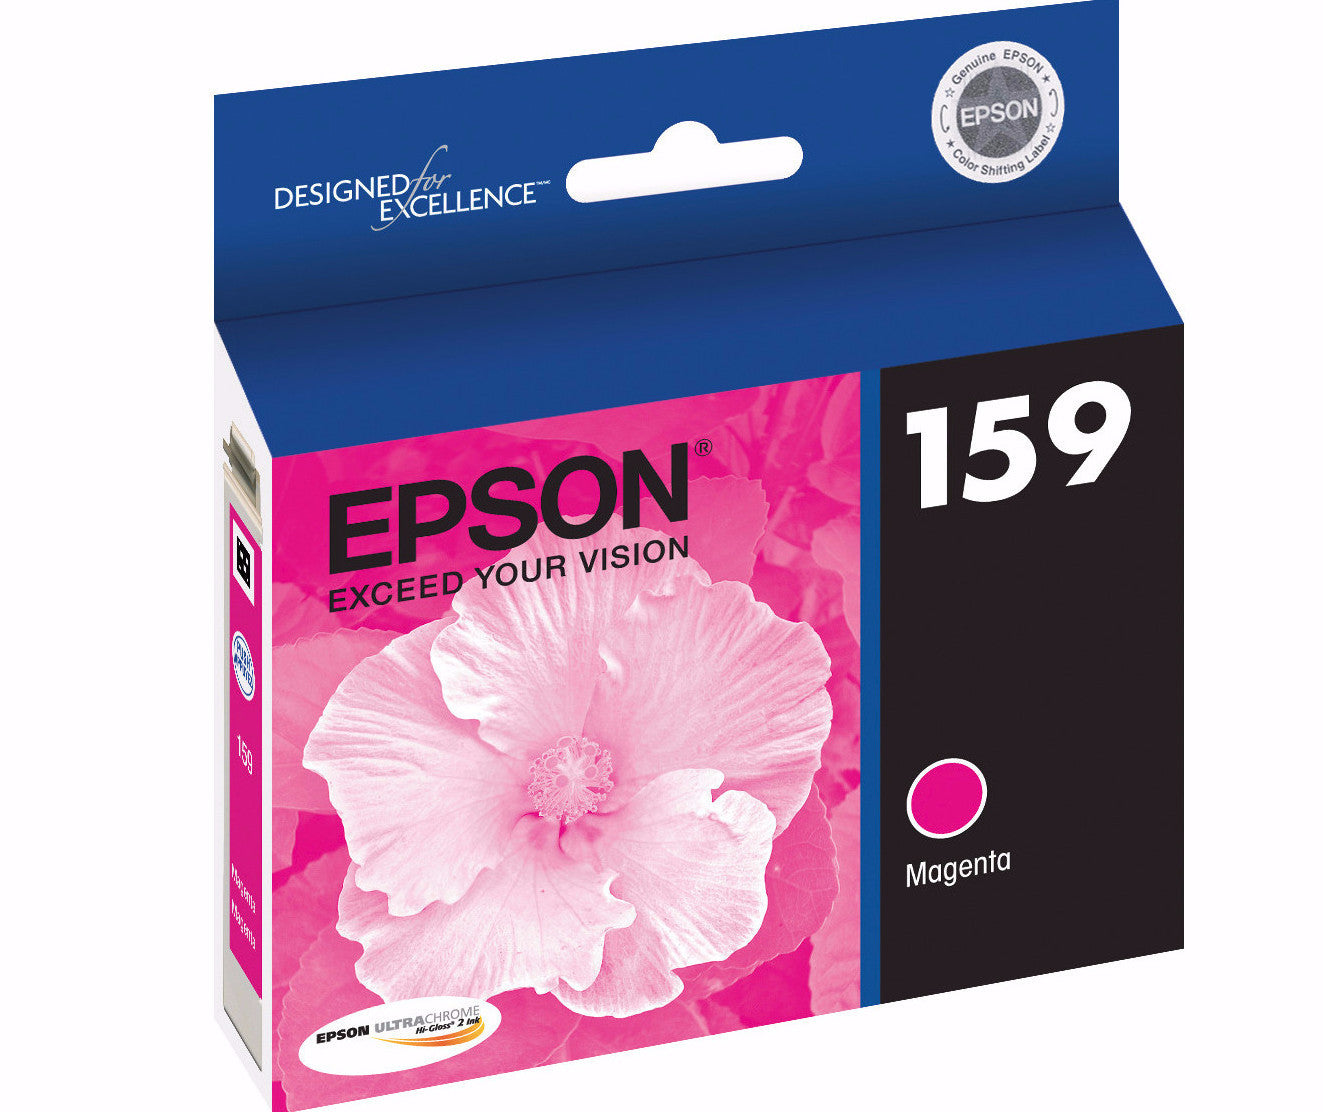 Epson T159320 R2000 Magenta Ink, printers ink small format, Epson - Pictureline 